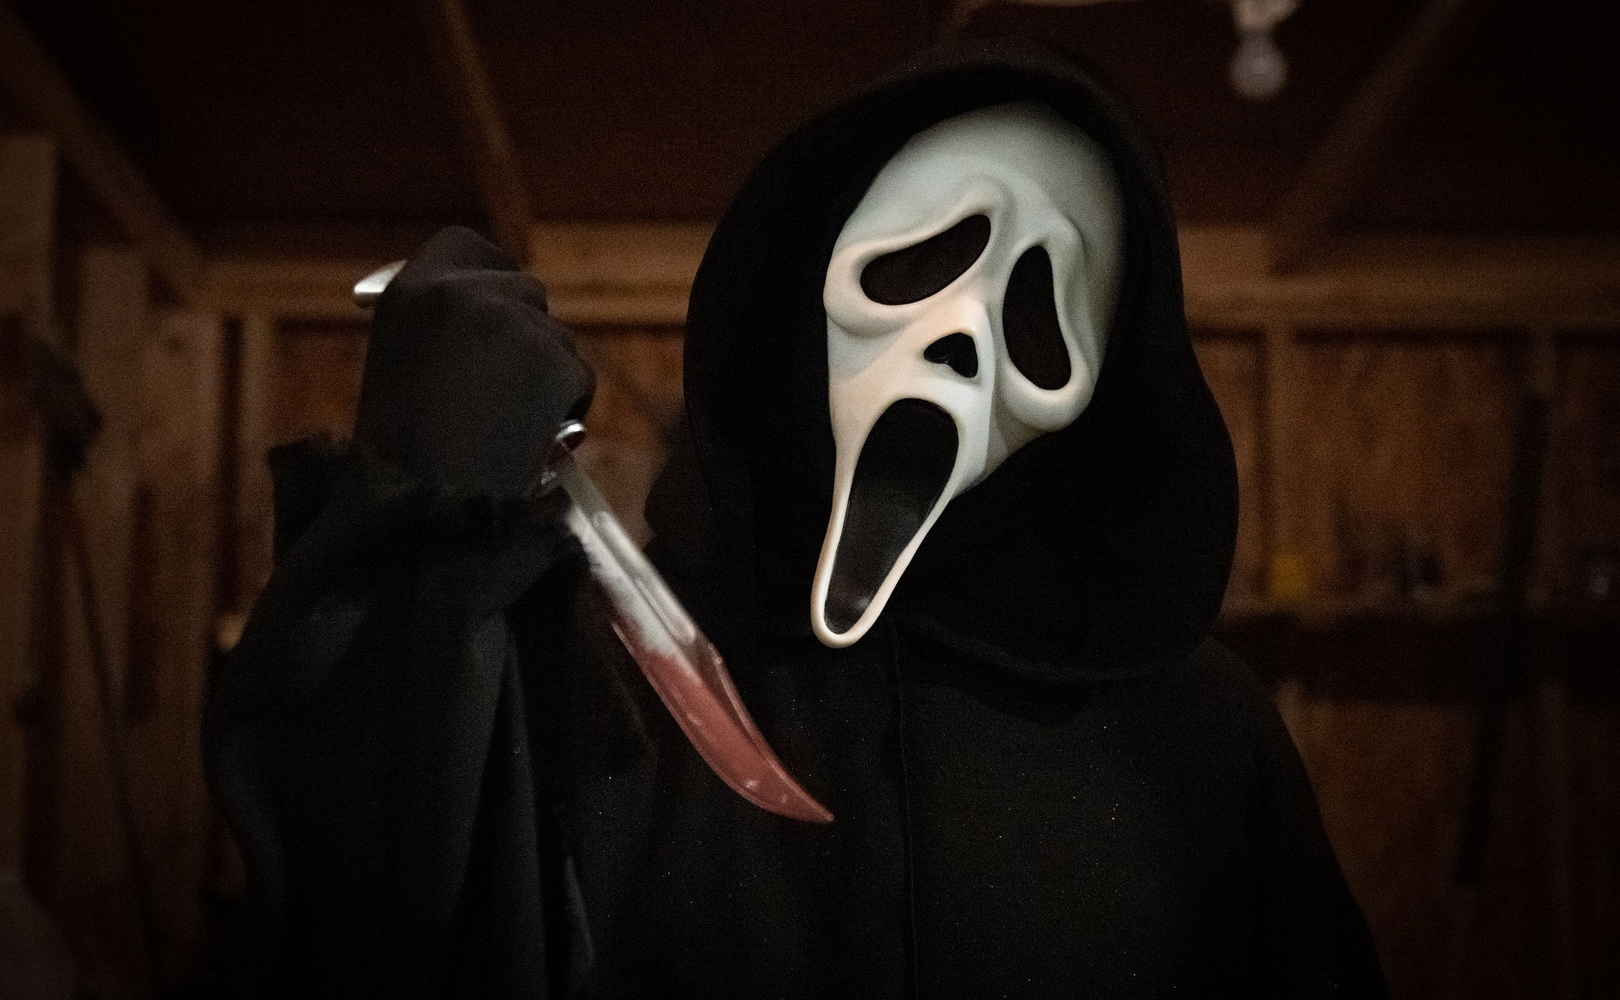 The Scream (2022) review - intrigue on par with a good movie